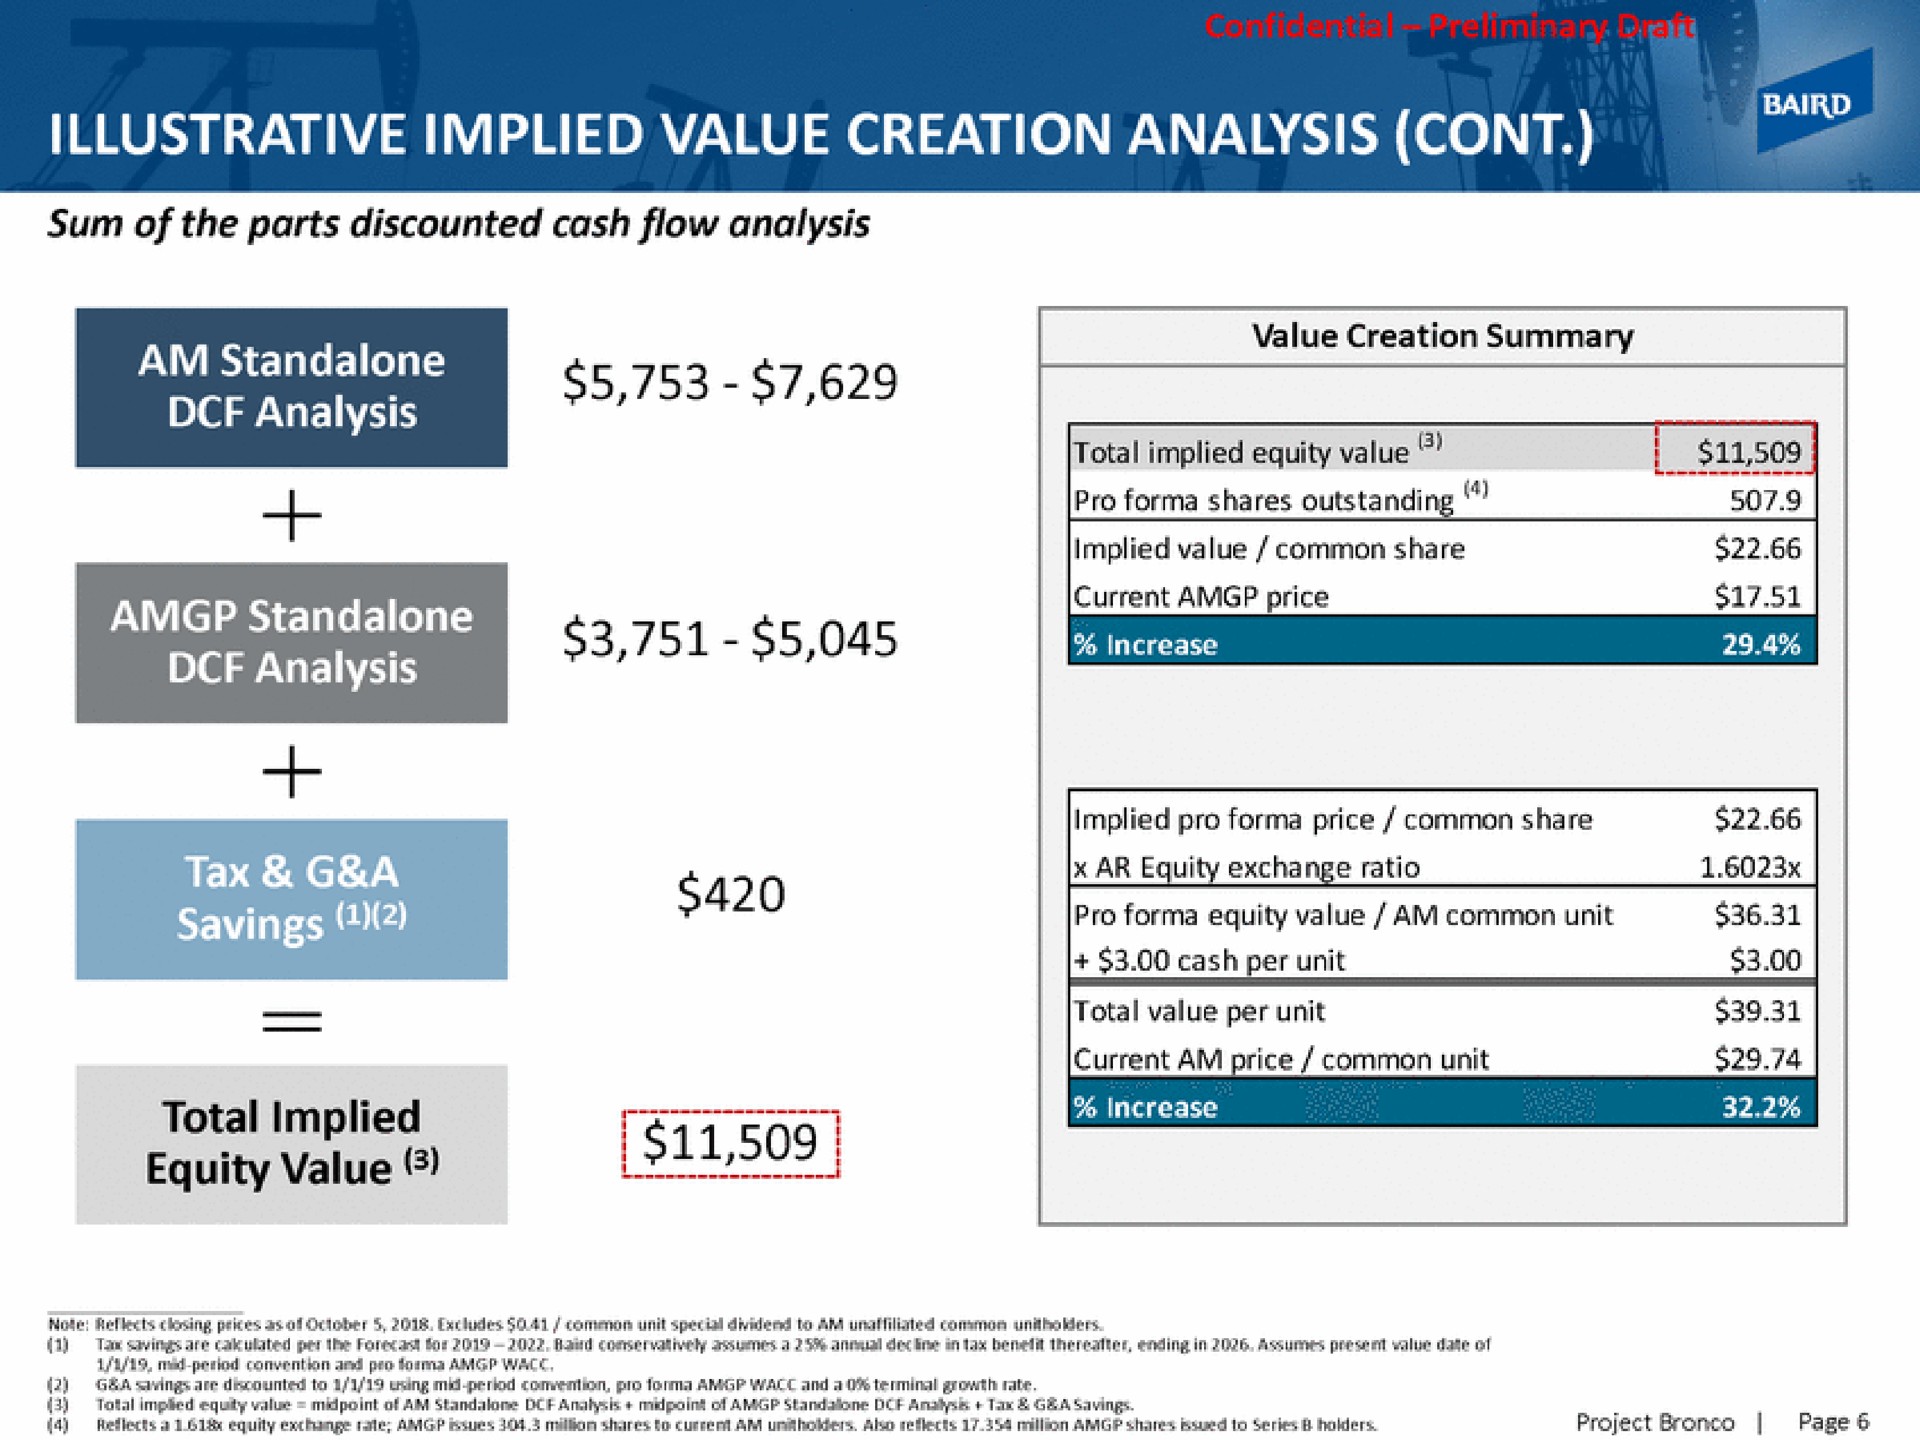 illustrative implied value creation analysis analysis total implied equity value | Baird